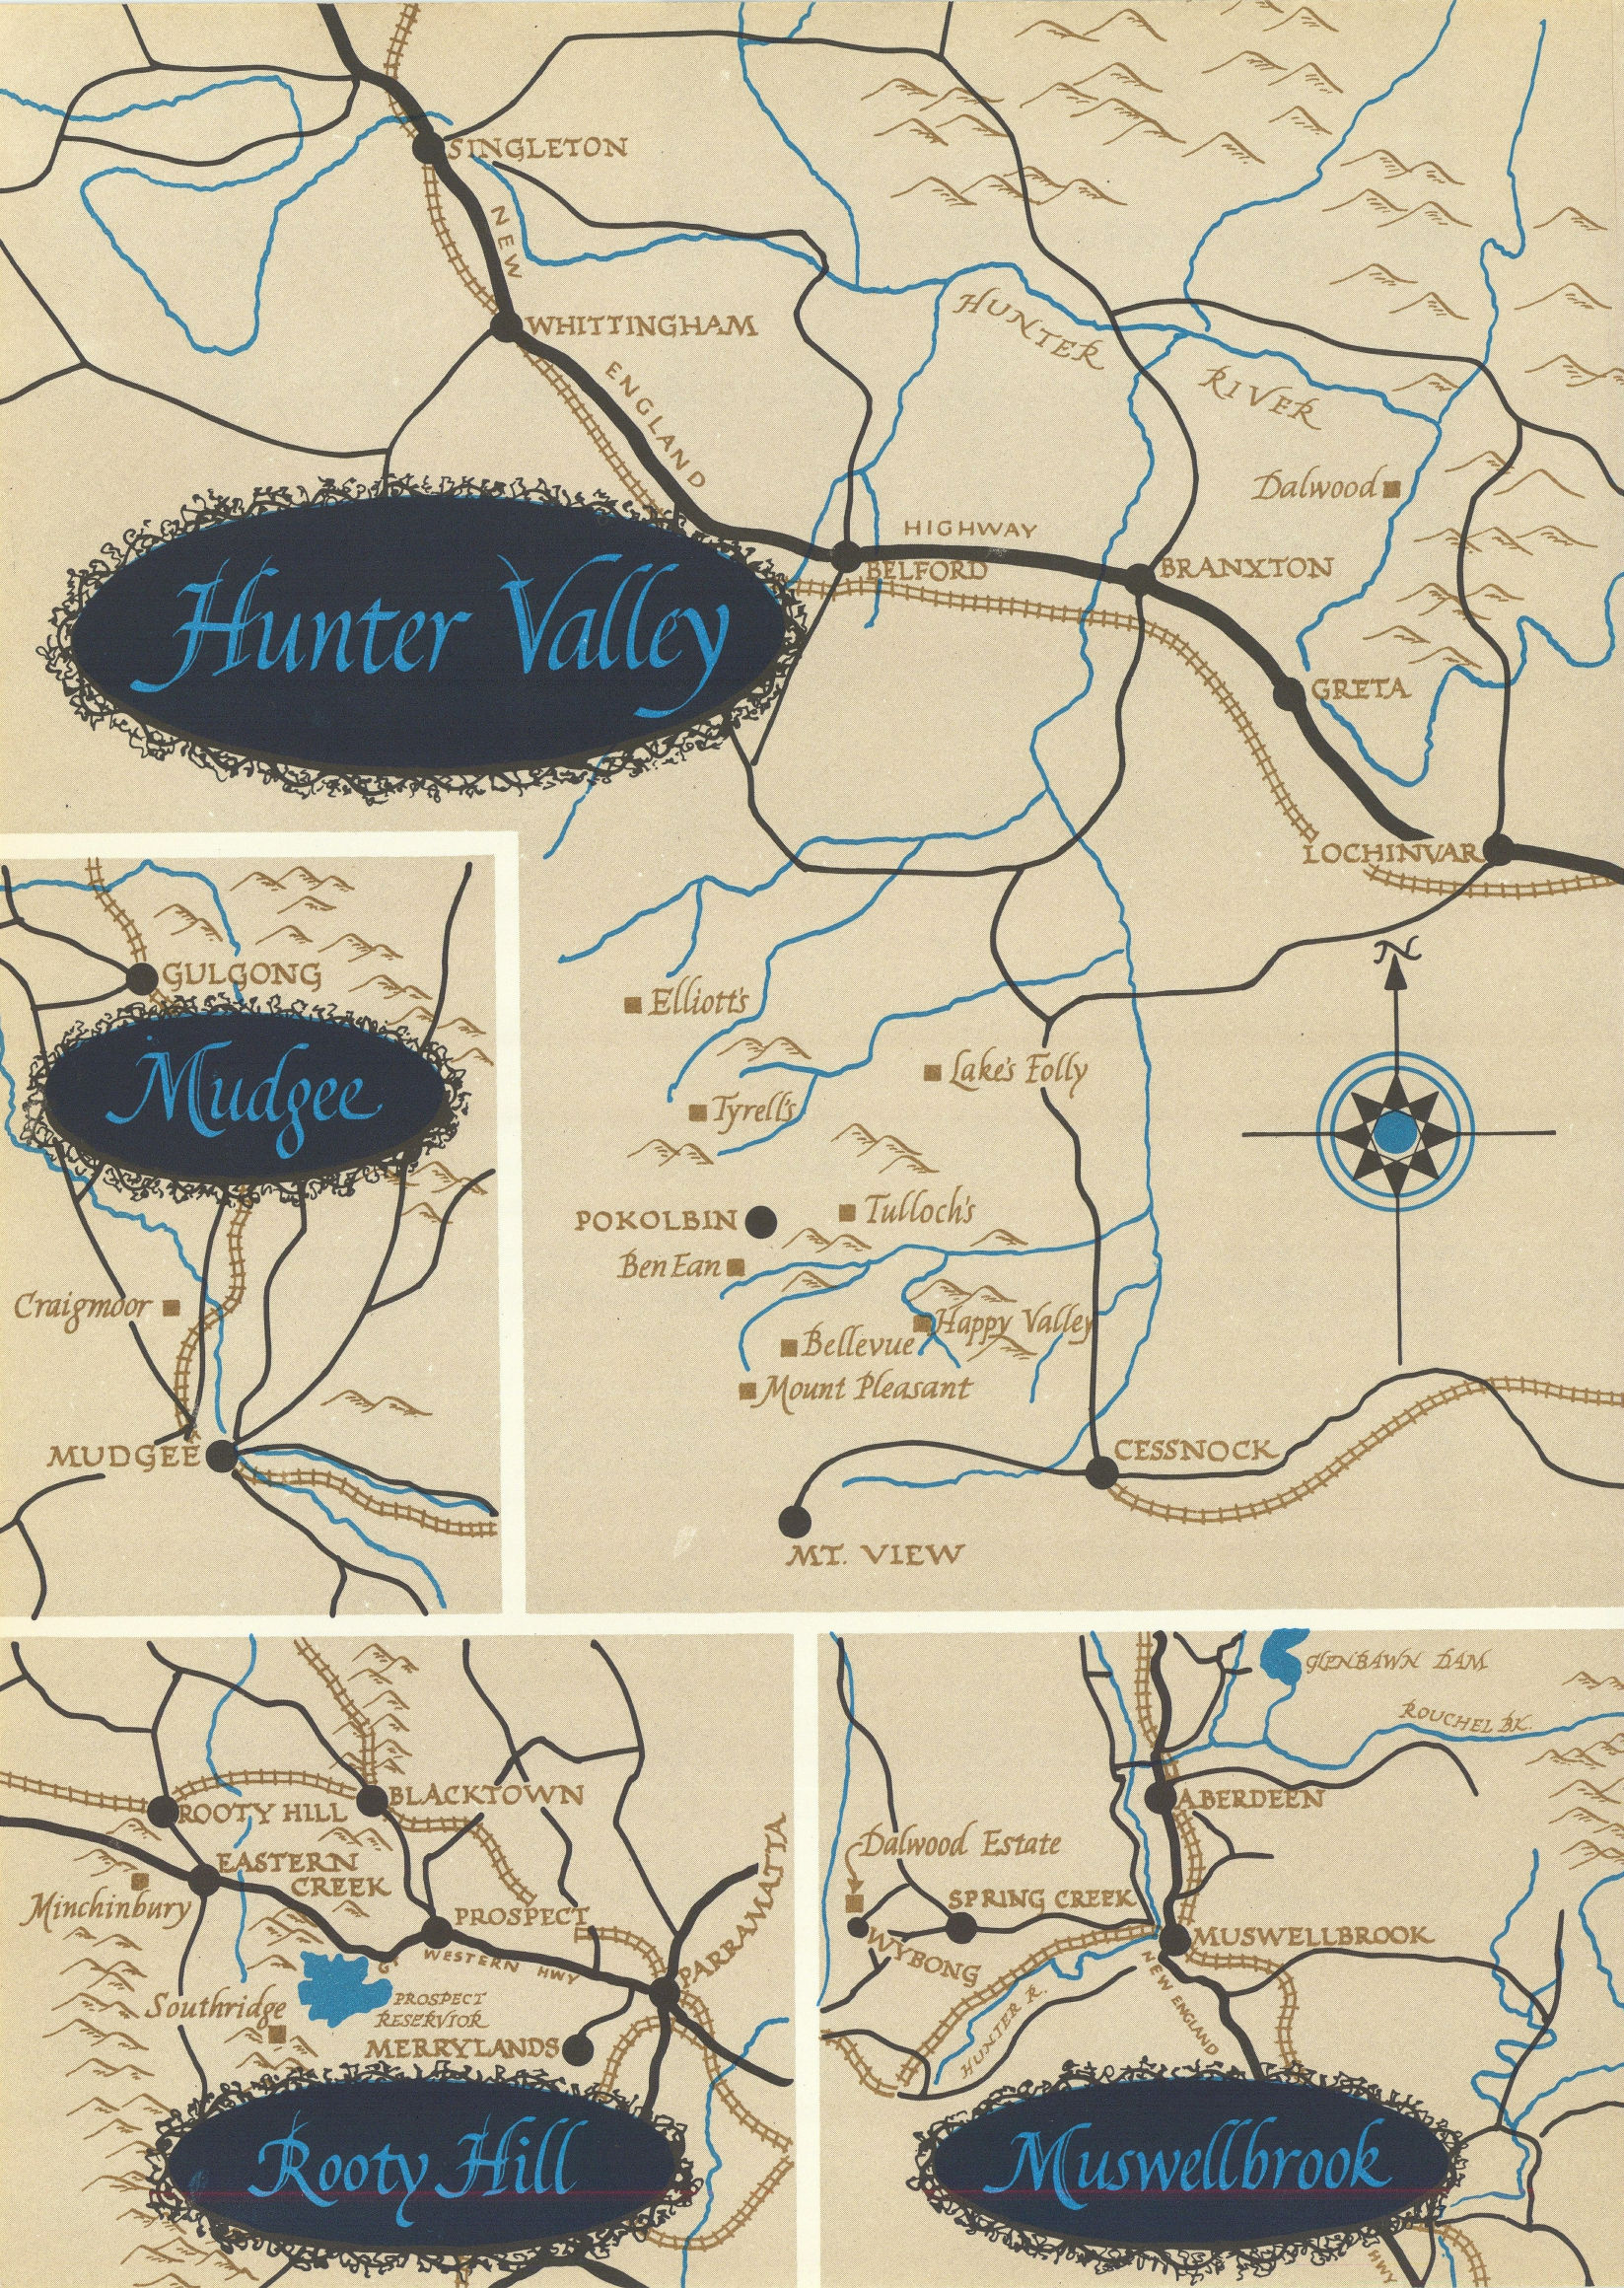 Hunter Valley Mudgee Rooty Hill Muswellbrook. New South Wales wineries 1966 map